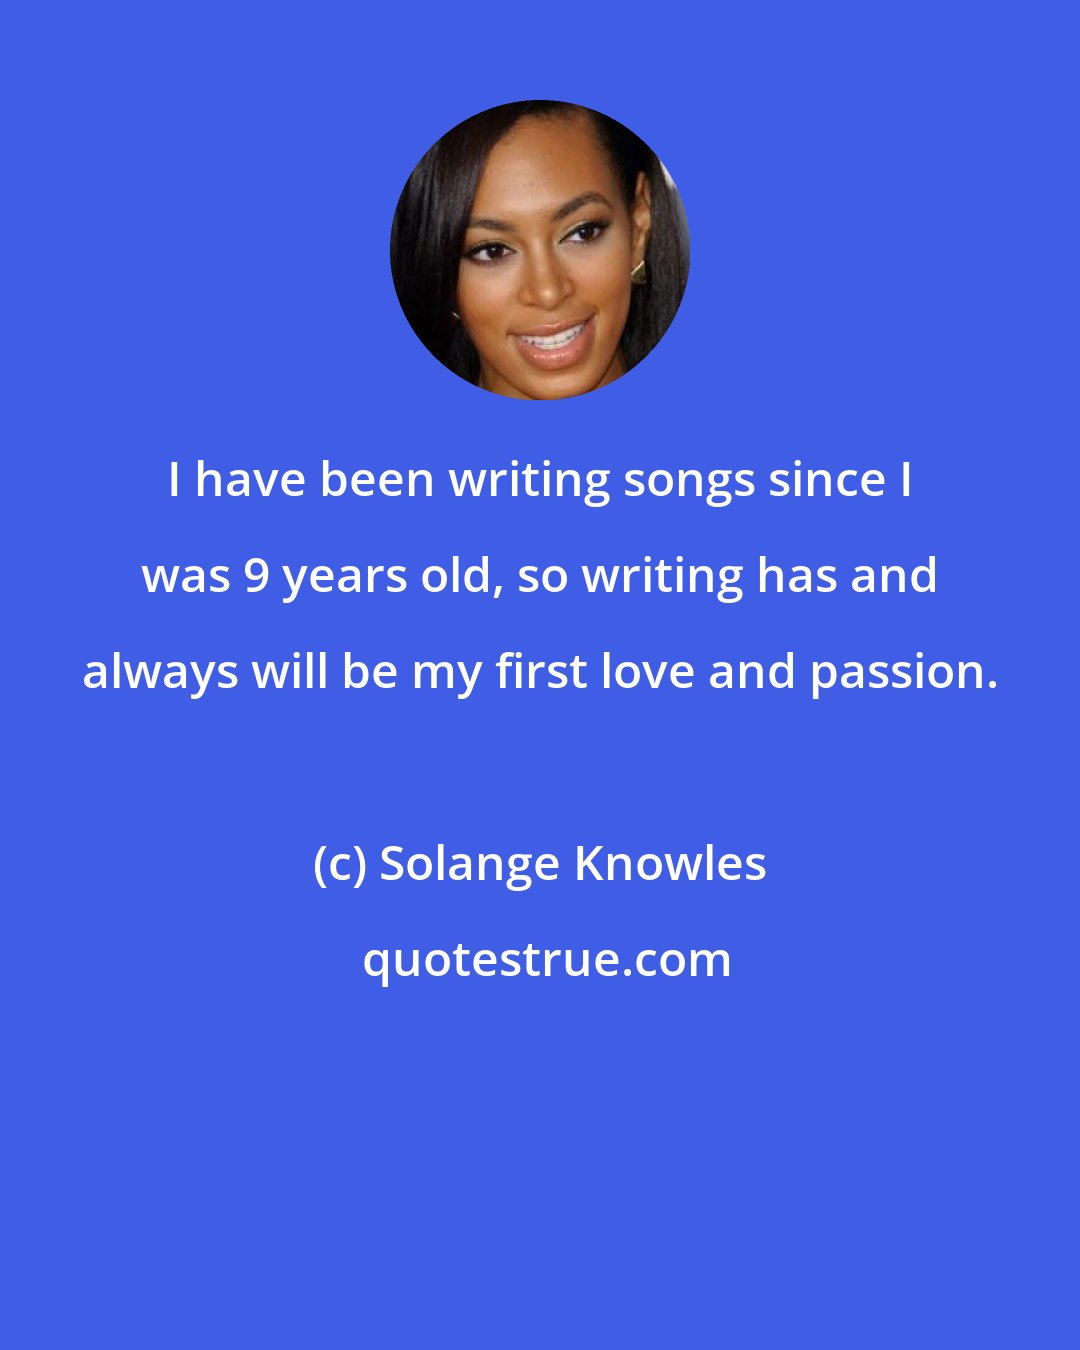 Solange Knowles: I have been writing songs since I was 9 years old, so writing has and always will be my first love and passion.